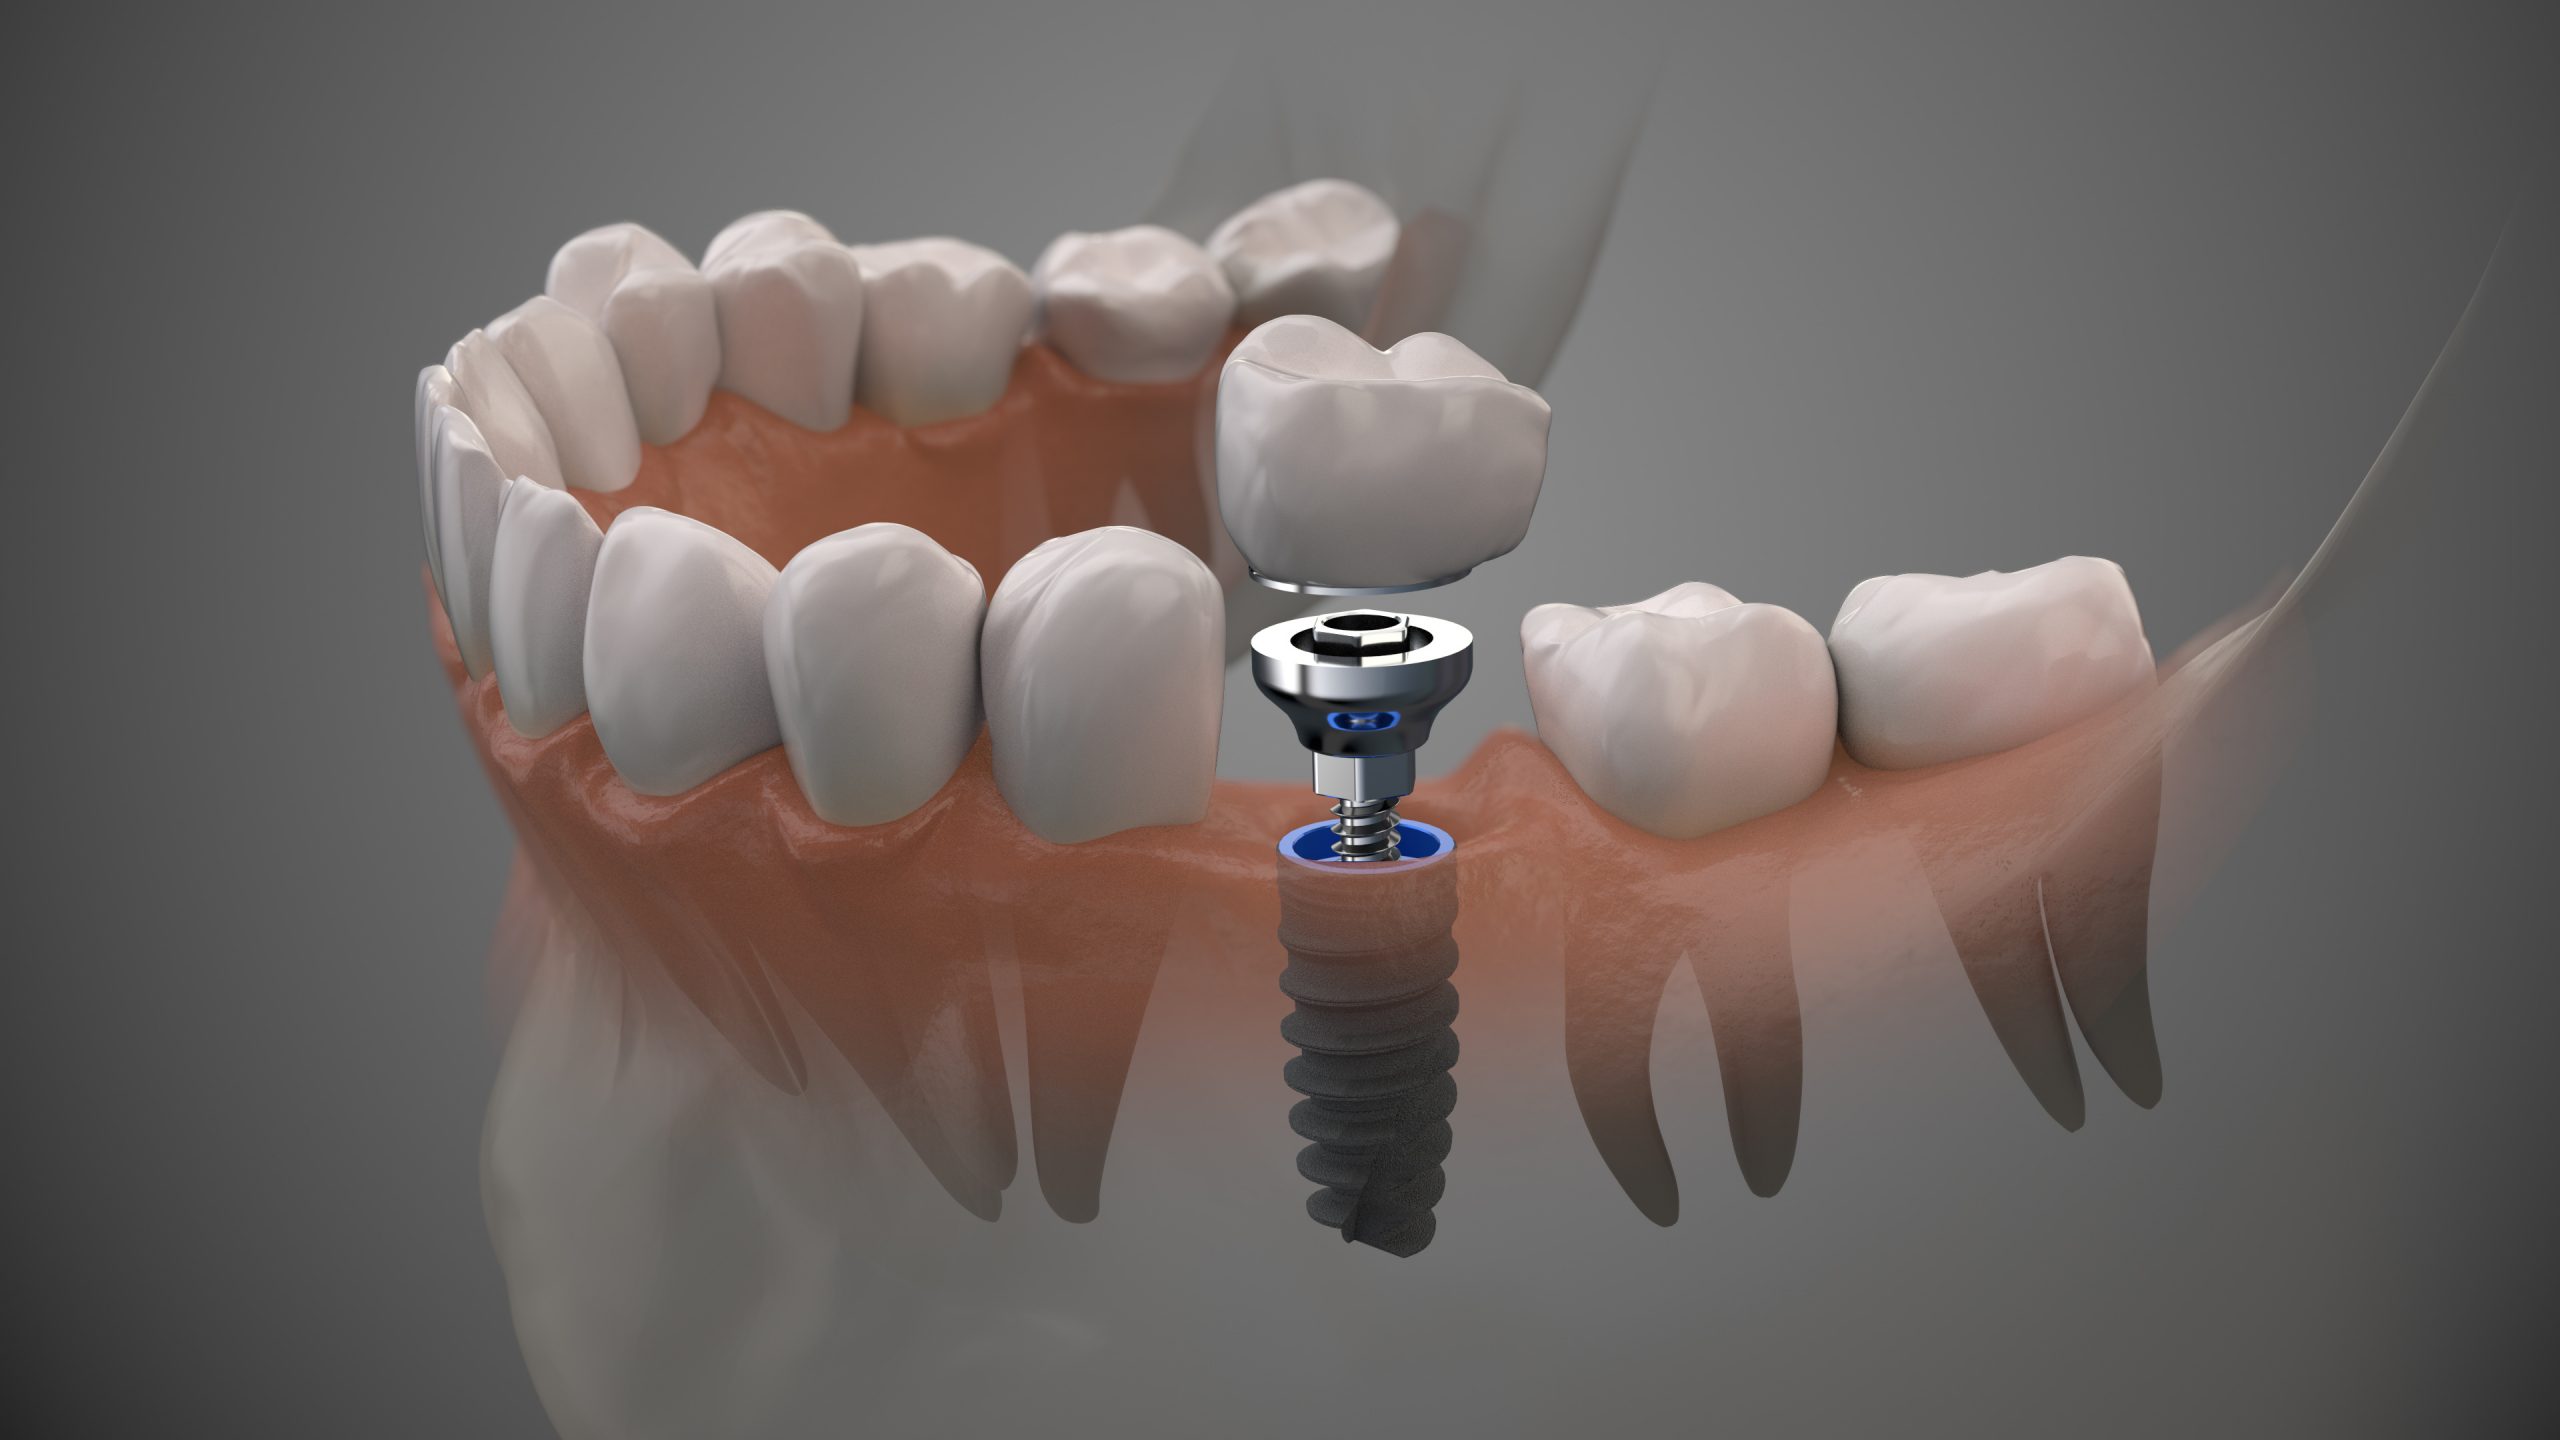 Digital rendering a dental implant, abutment, and crown being installed in a lower jaw.